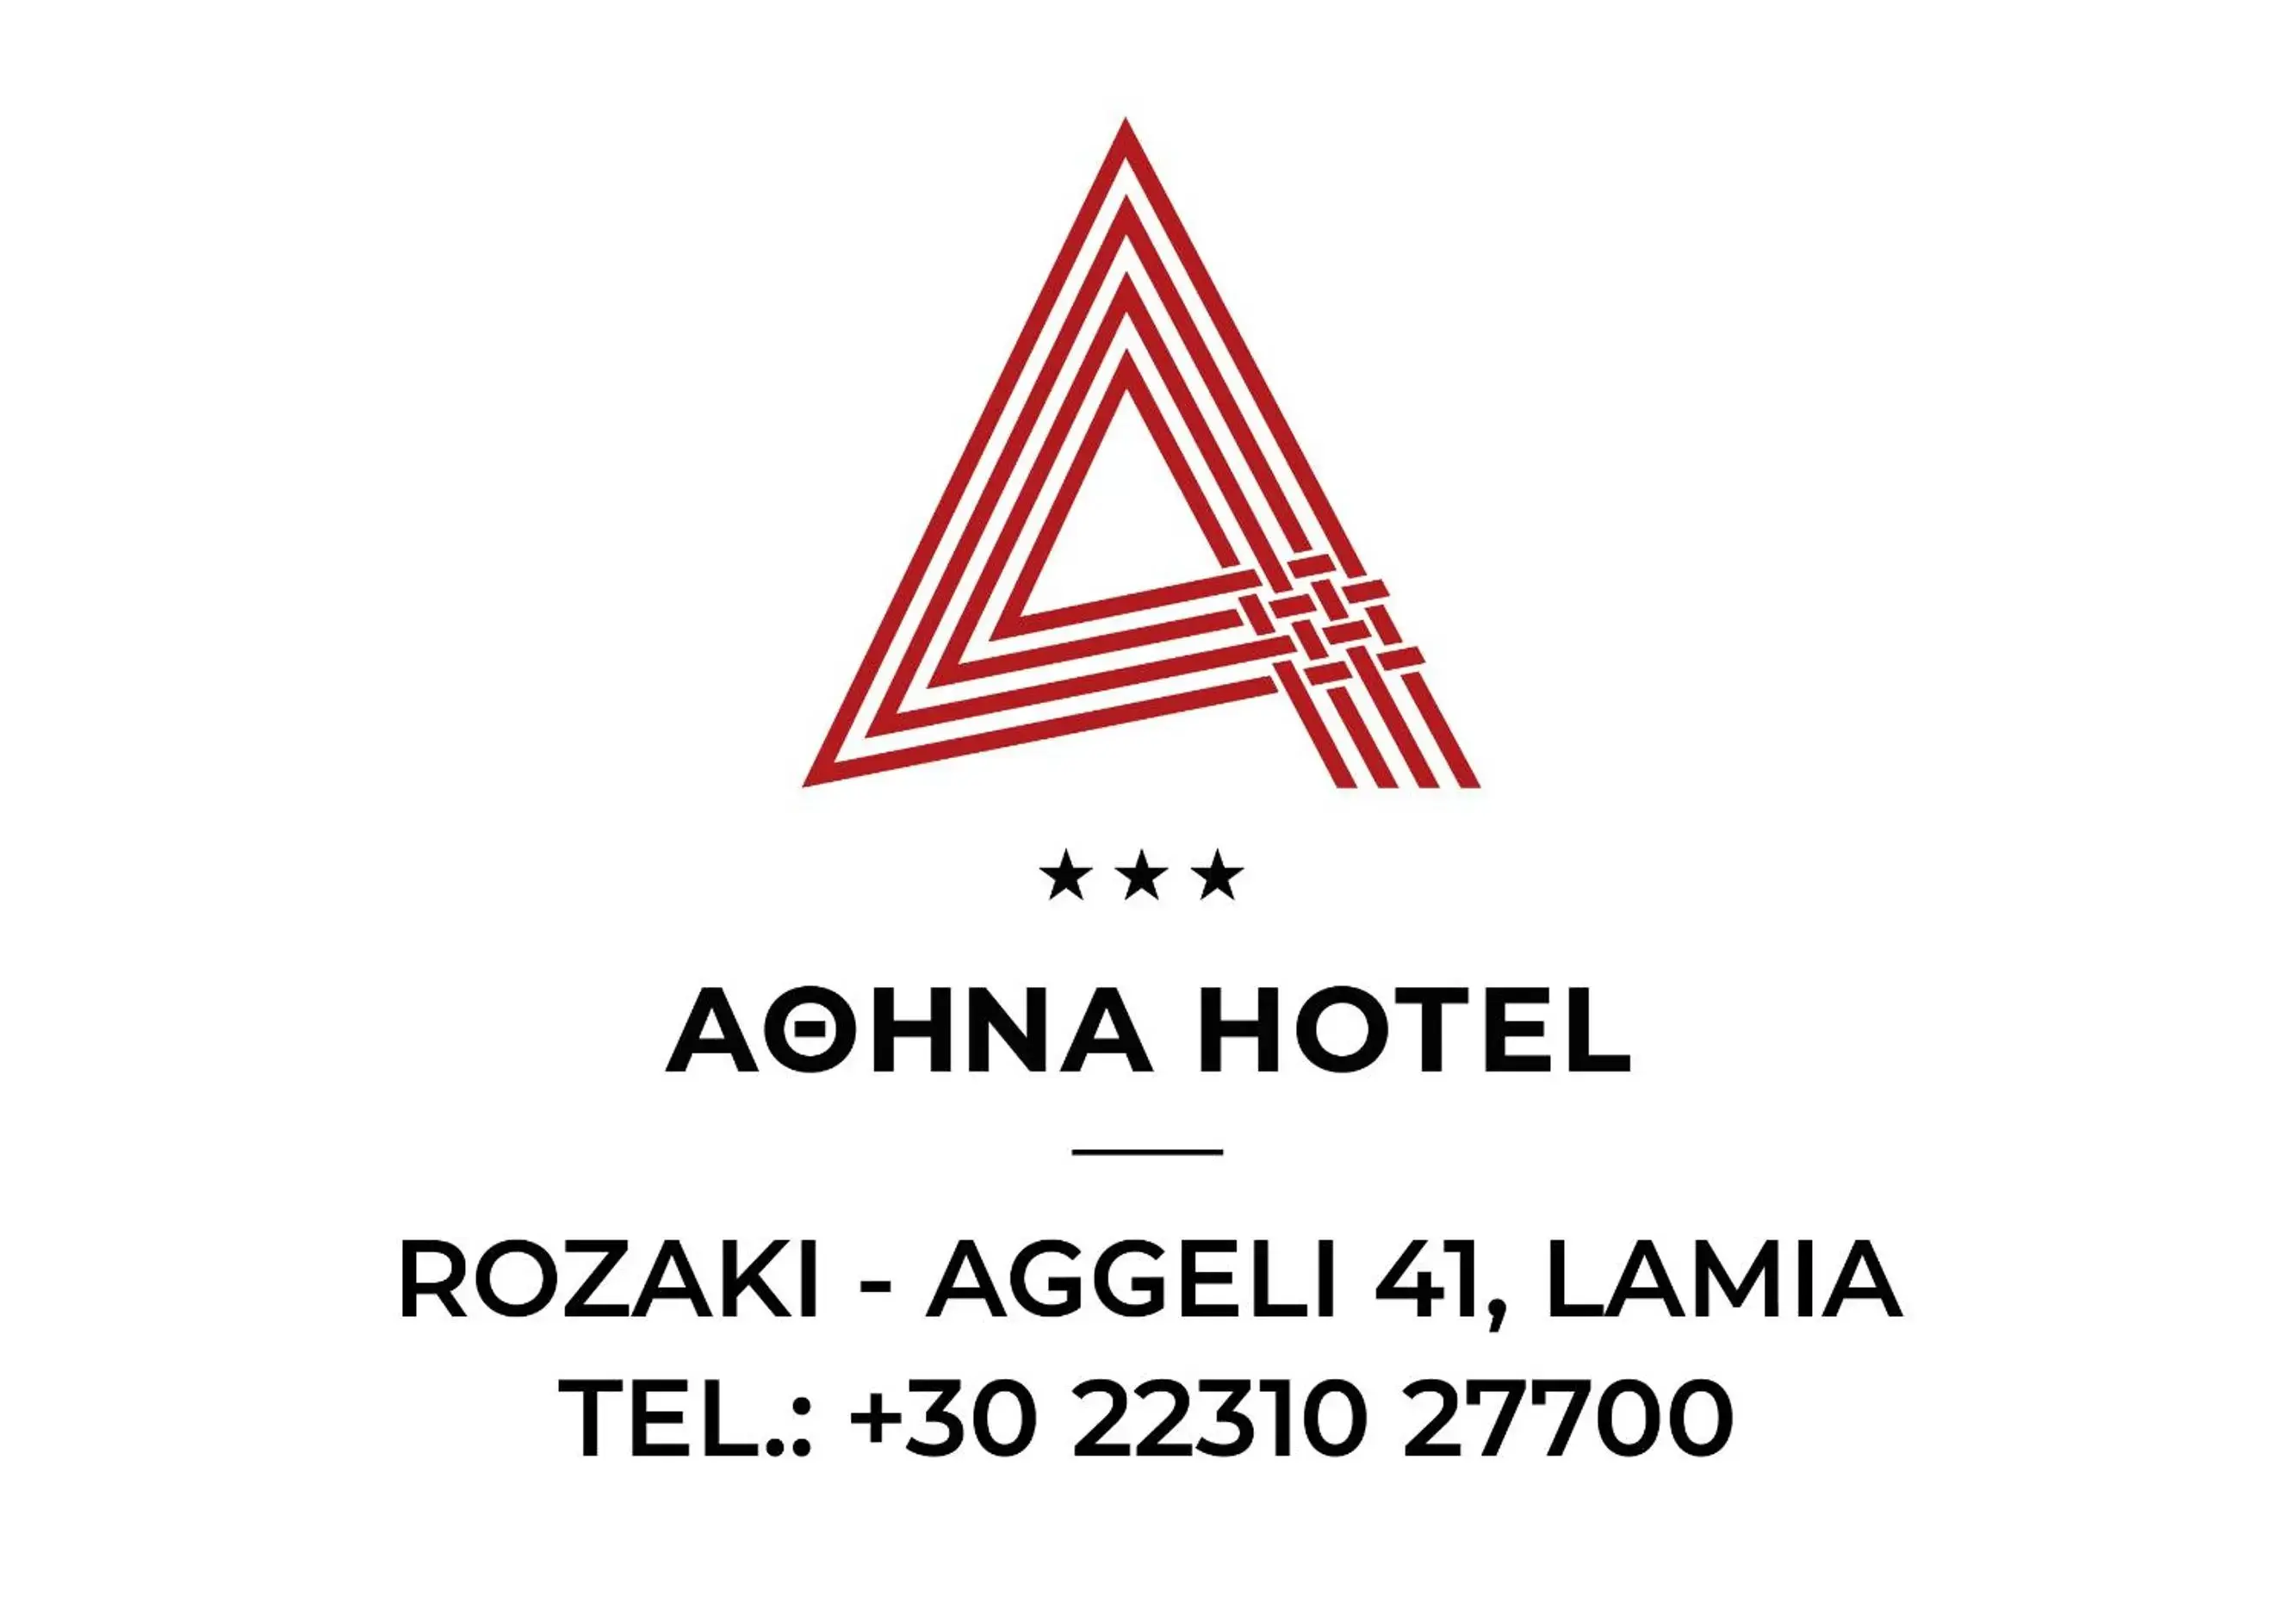 Property logo or sign in Hotel Athina